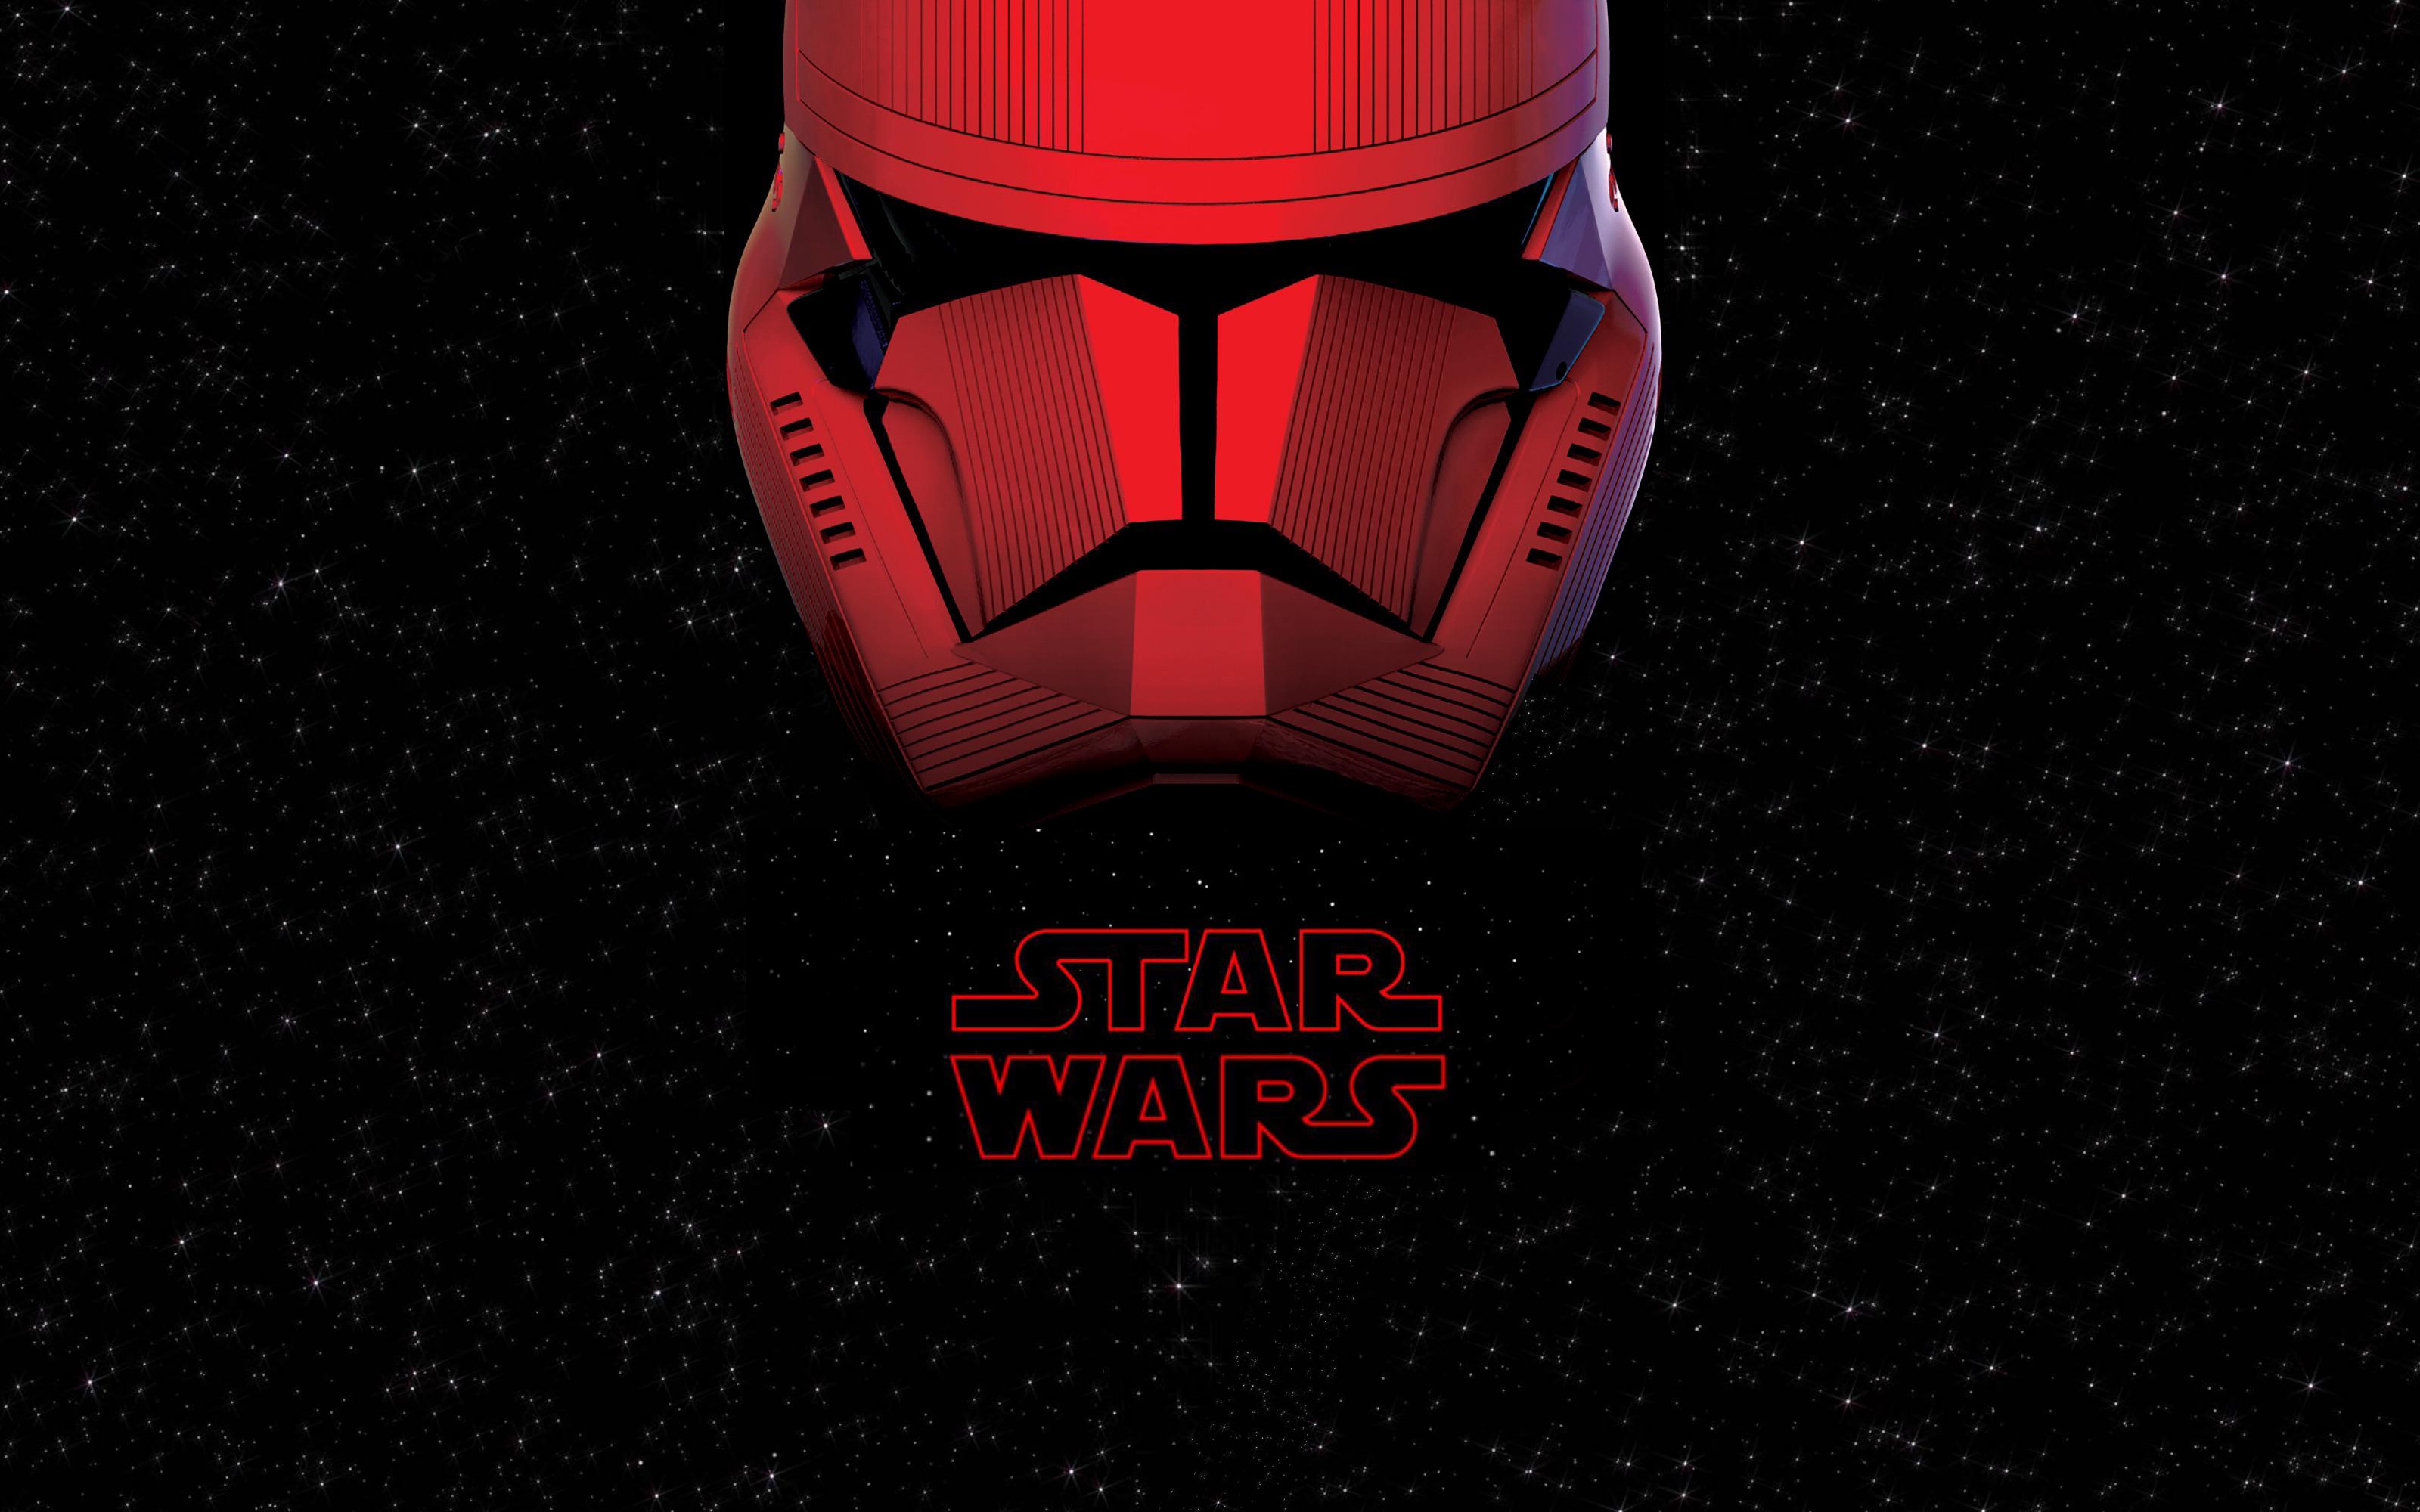 Sith 4K wallpaper for your desktop or mobile screen free and easy to download